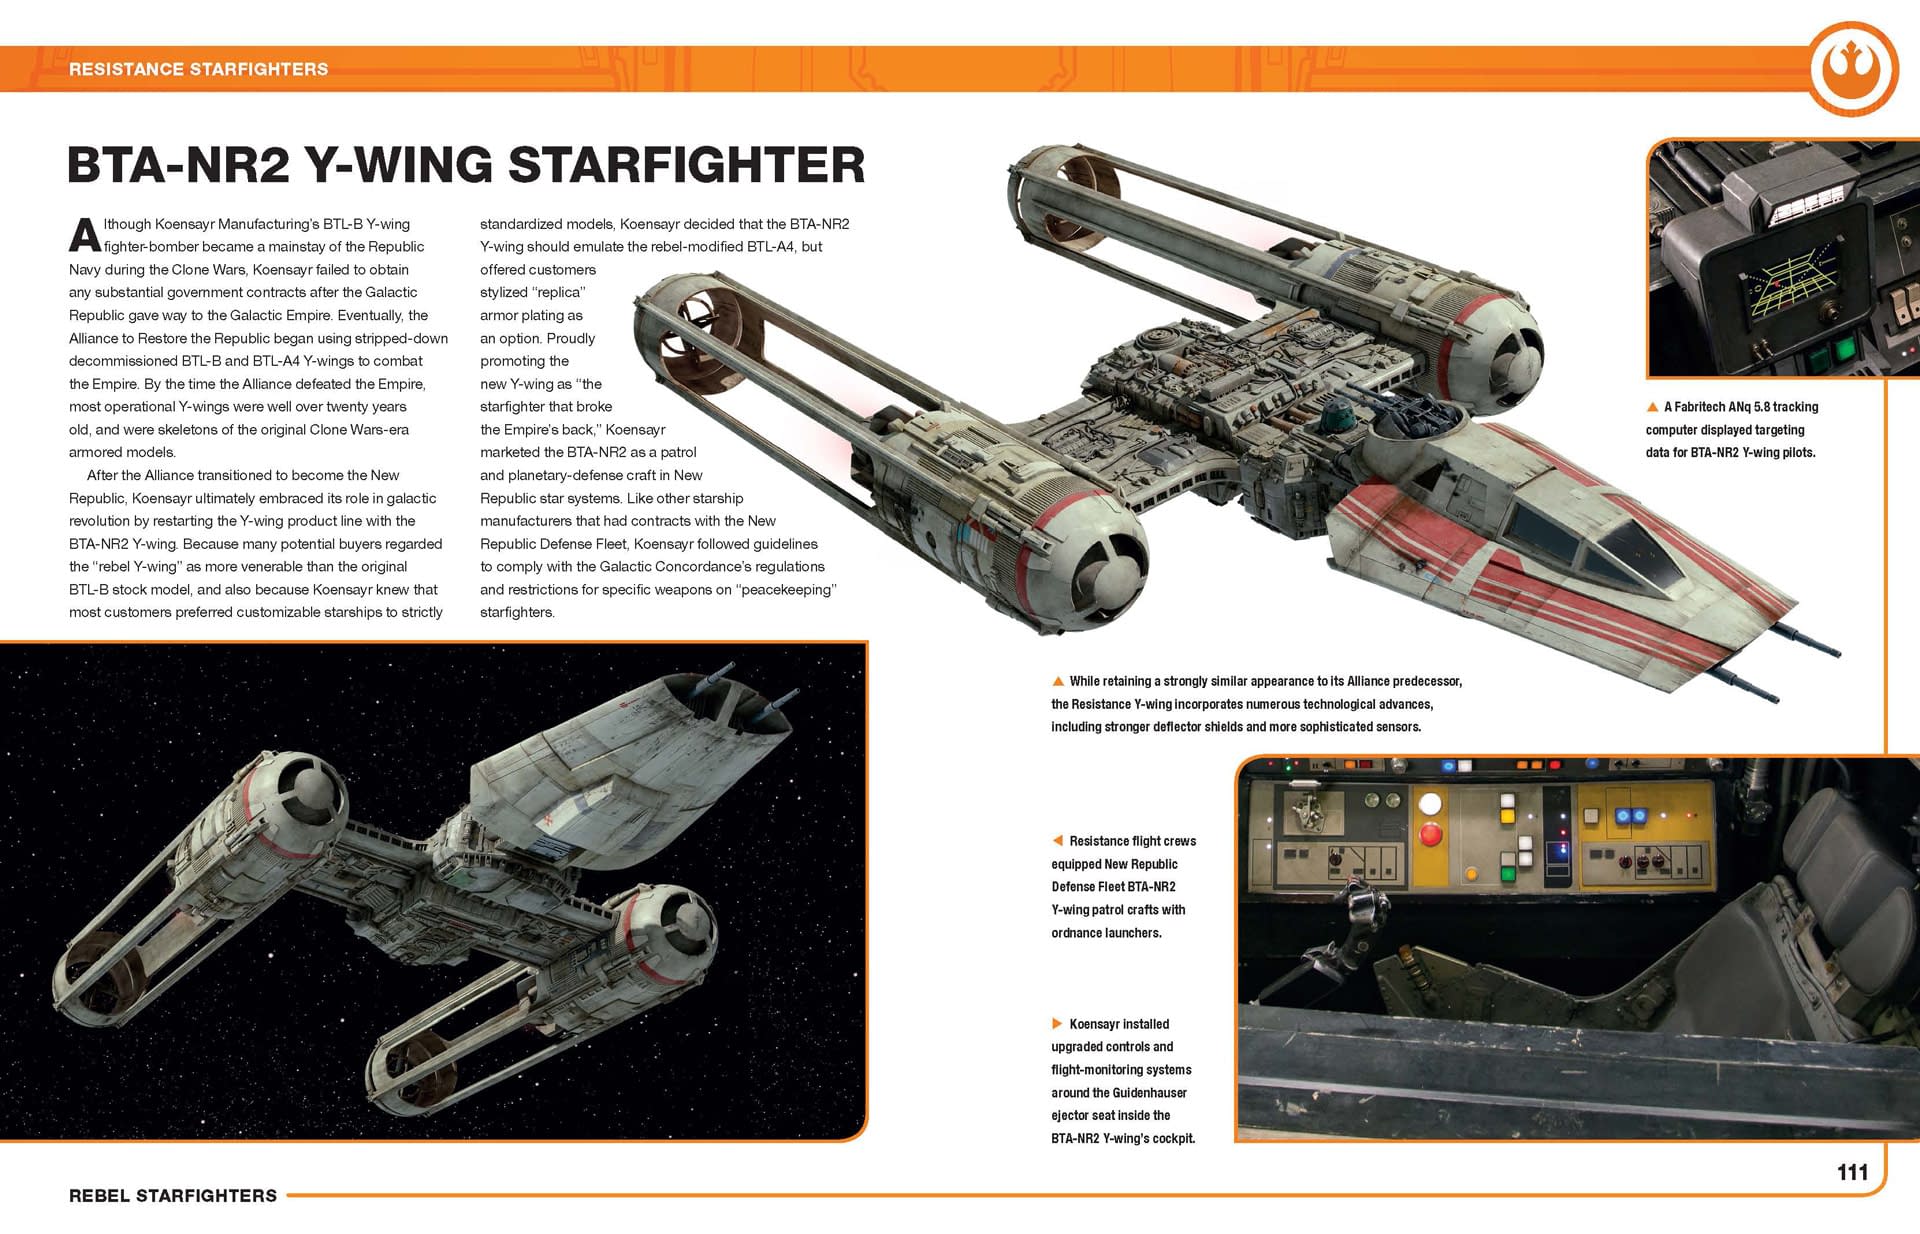 New "Star Wars" Book Looks Beneath the Hood of Classic Ships